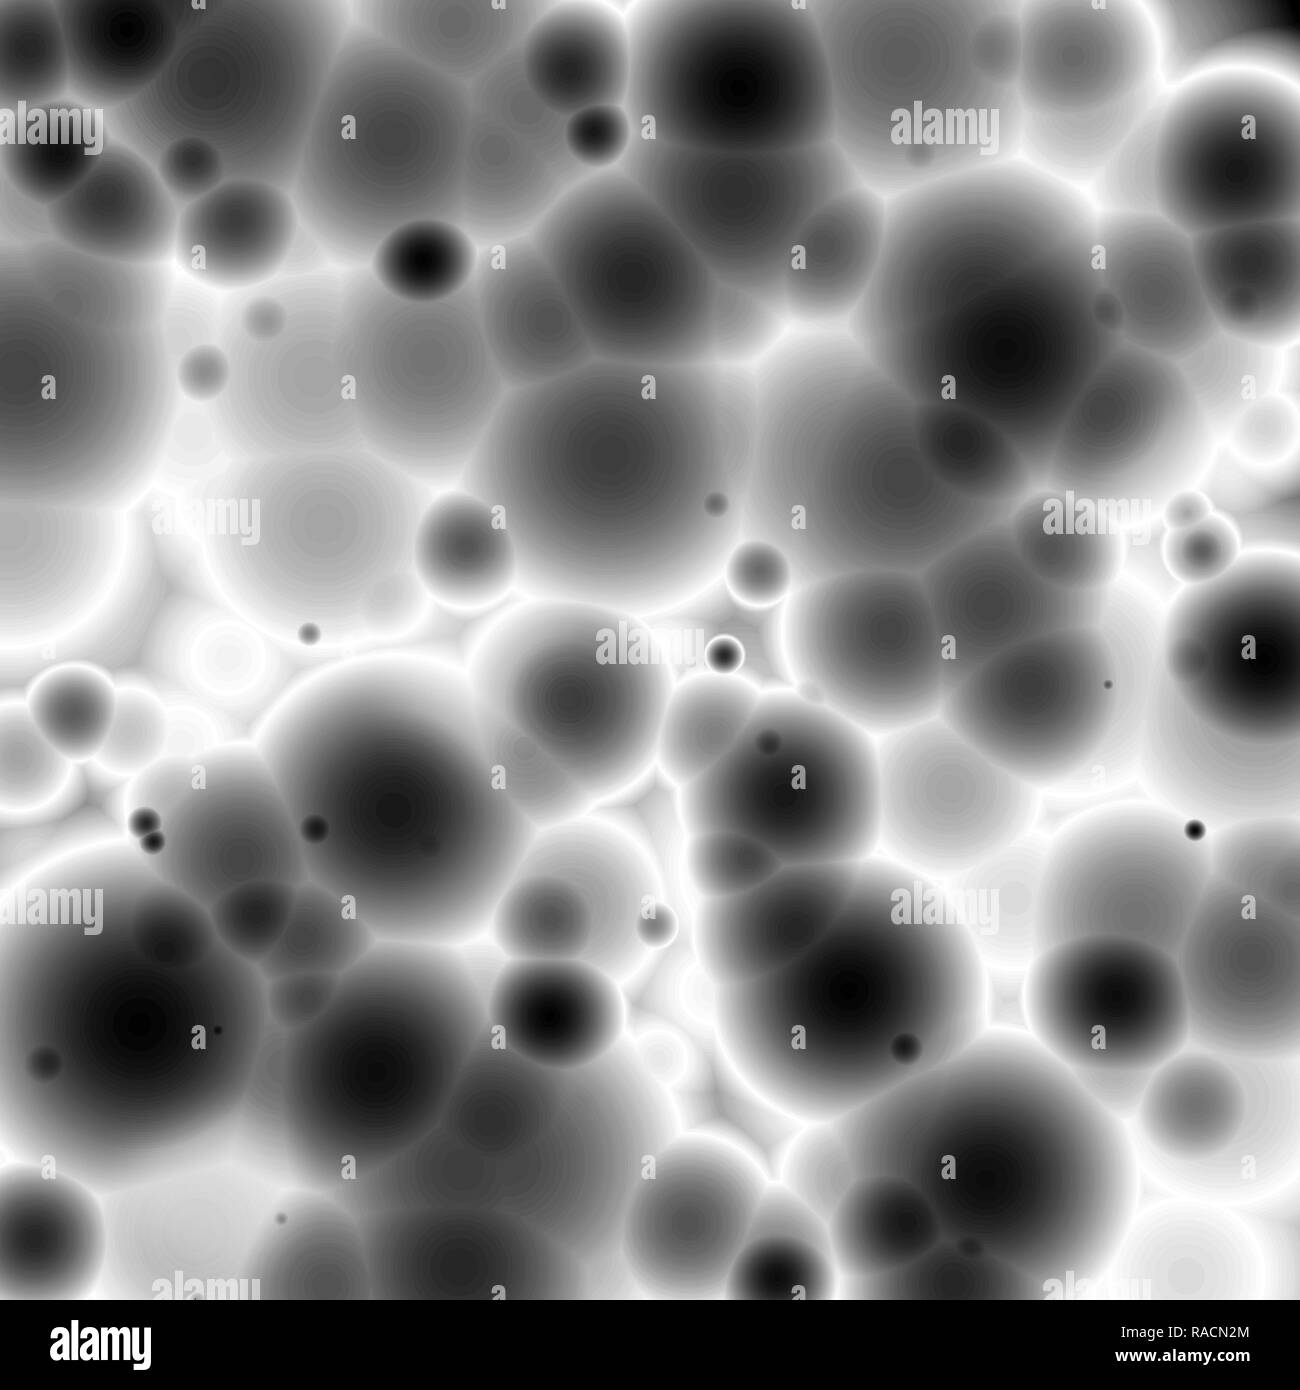 Black bacteria under the microscope, abstract background Stock Photo